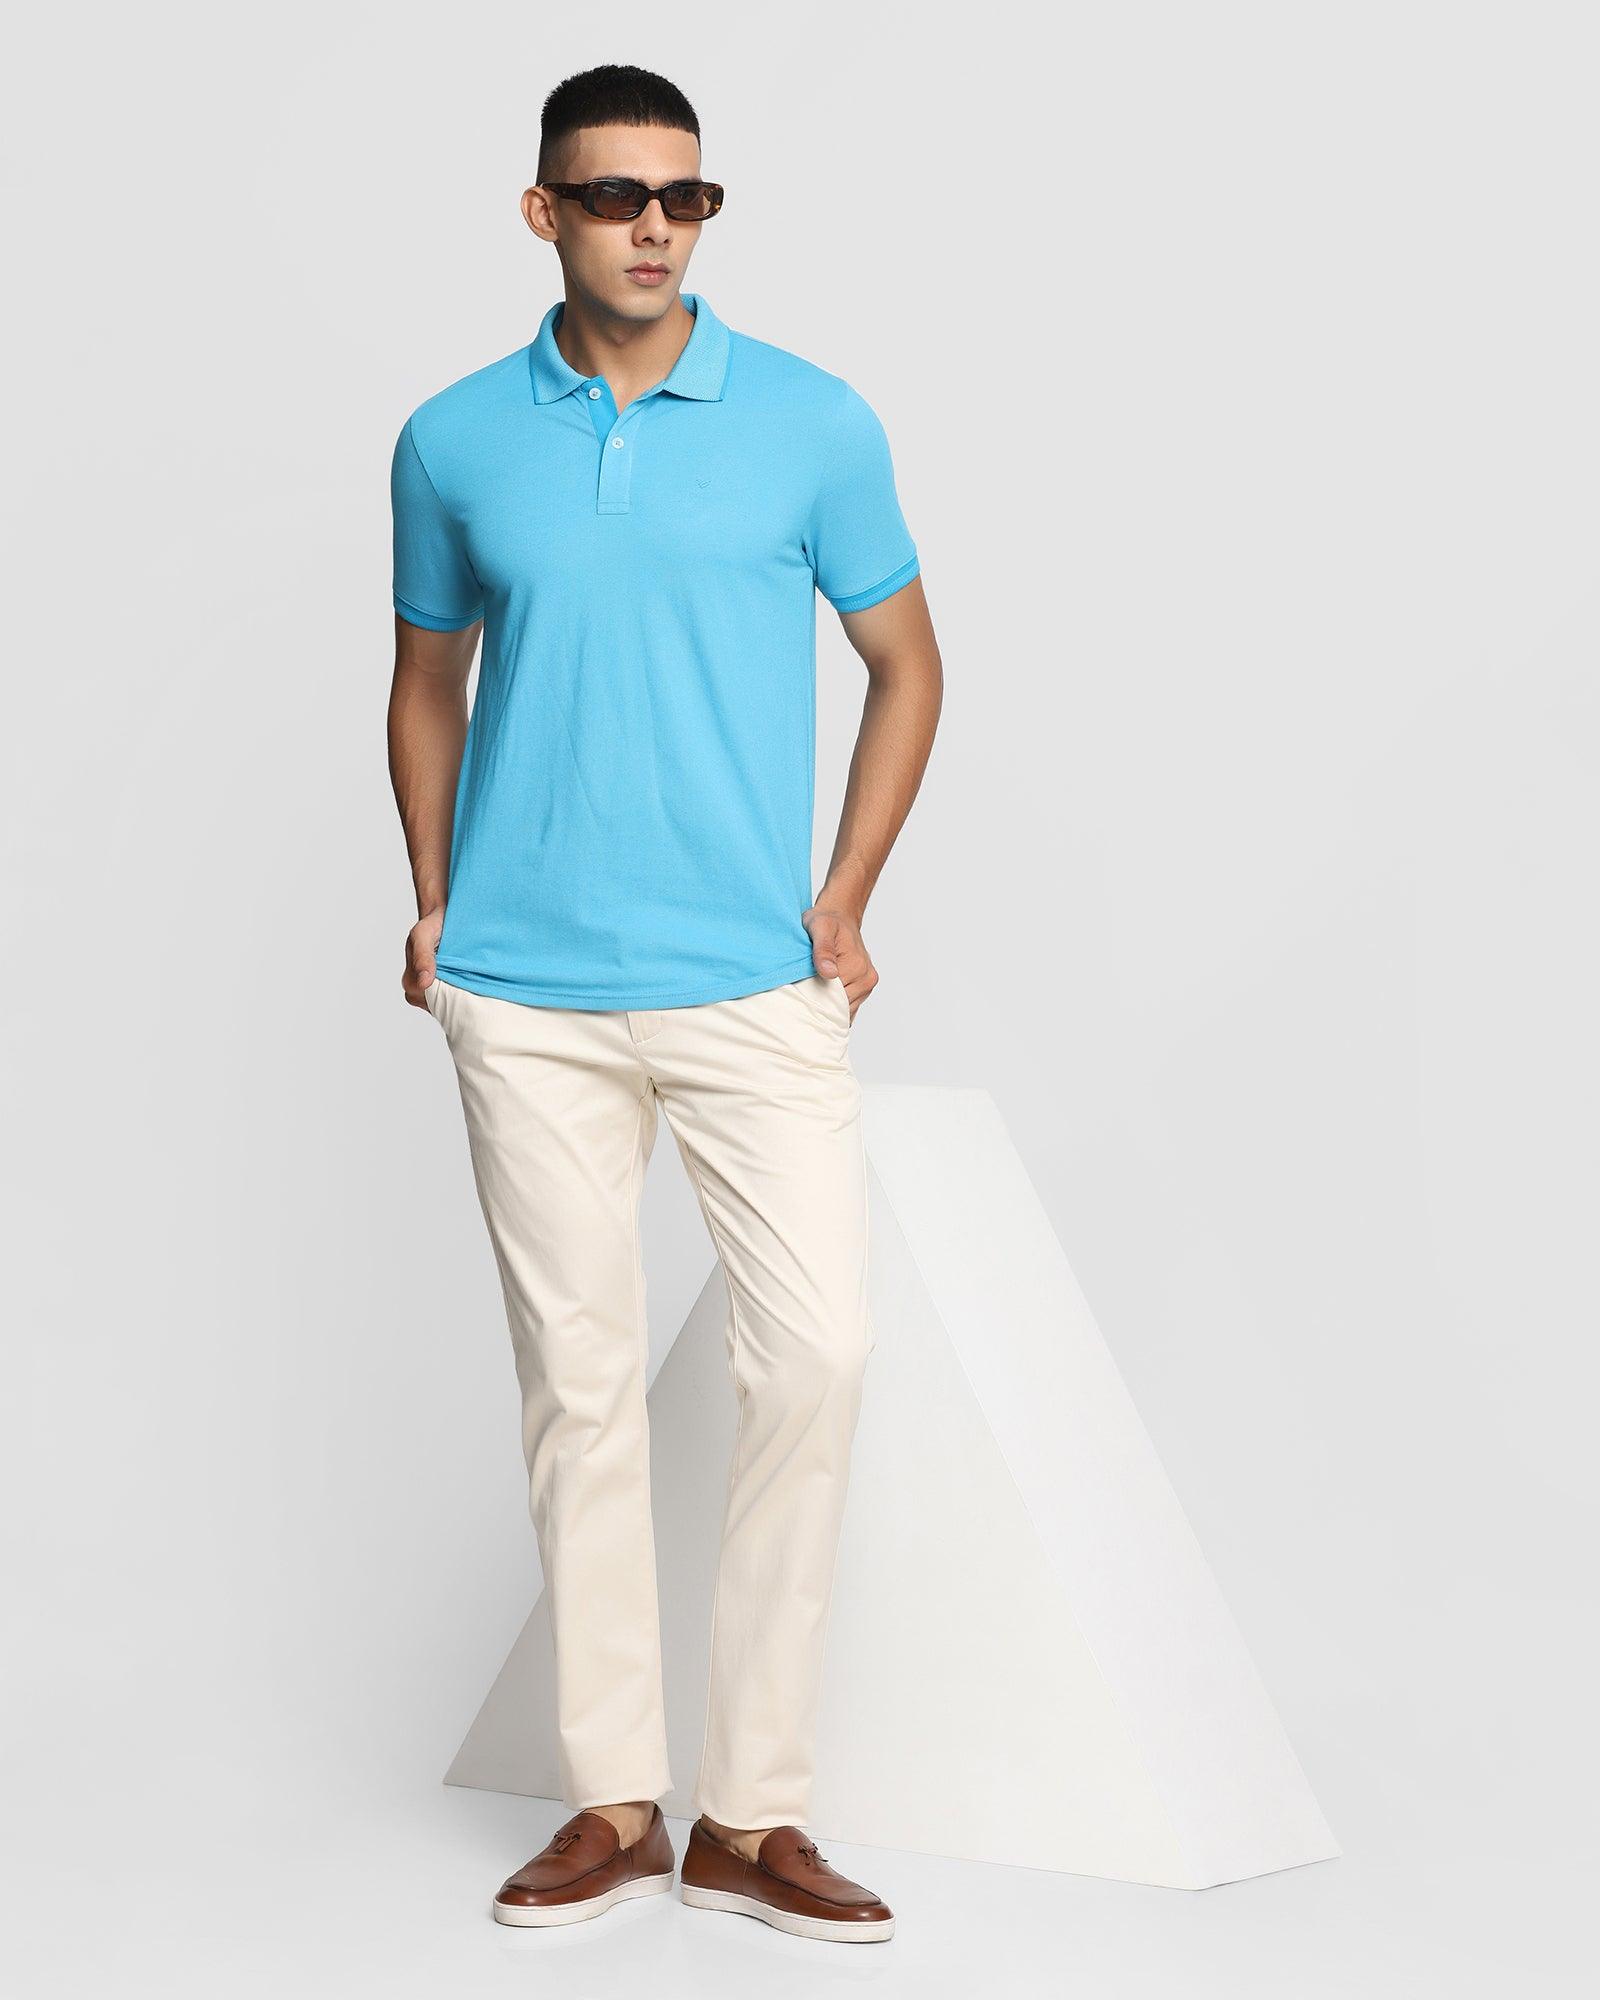 Polo Blue Topaz Textured T Shirt - Penny